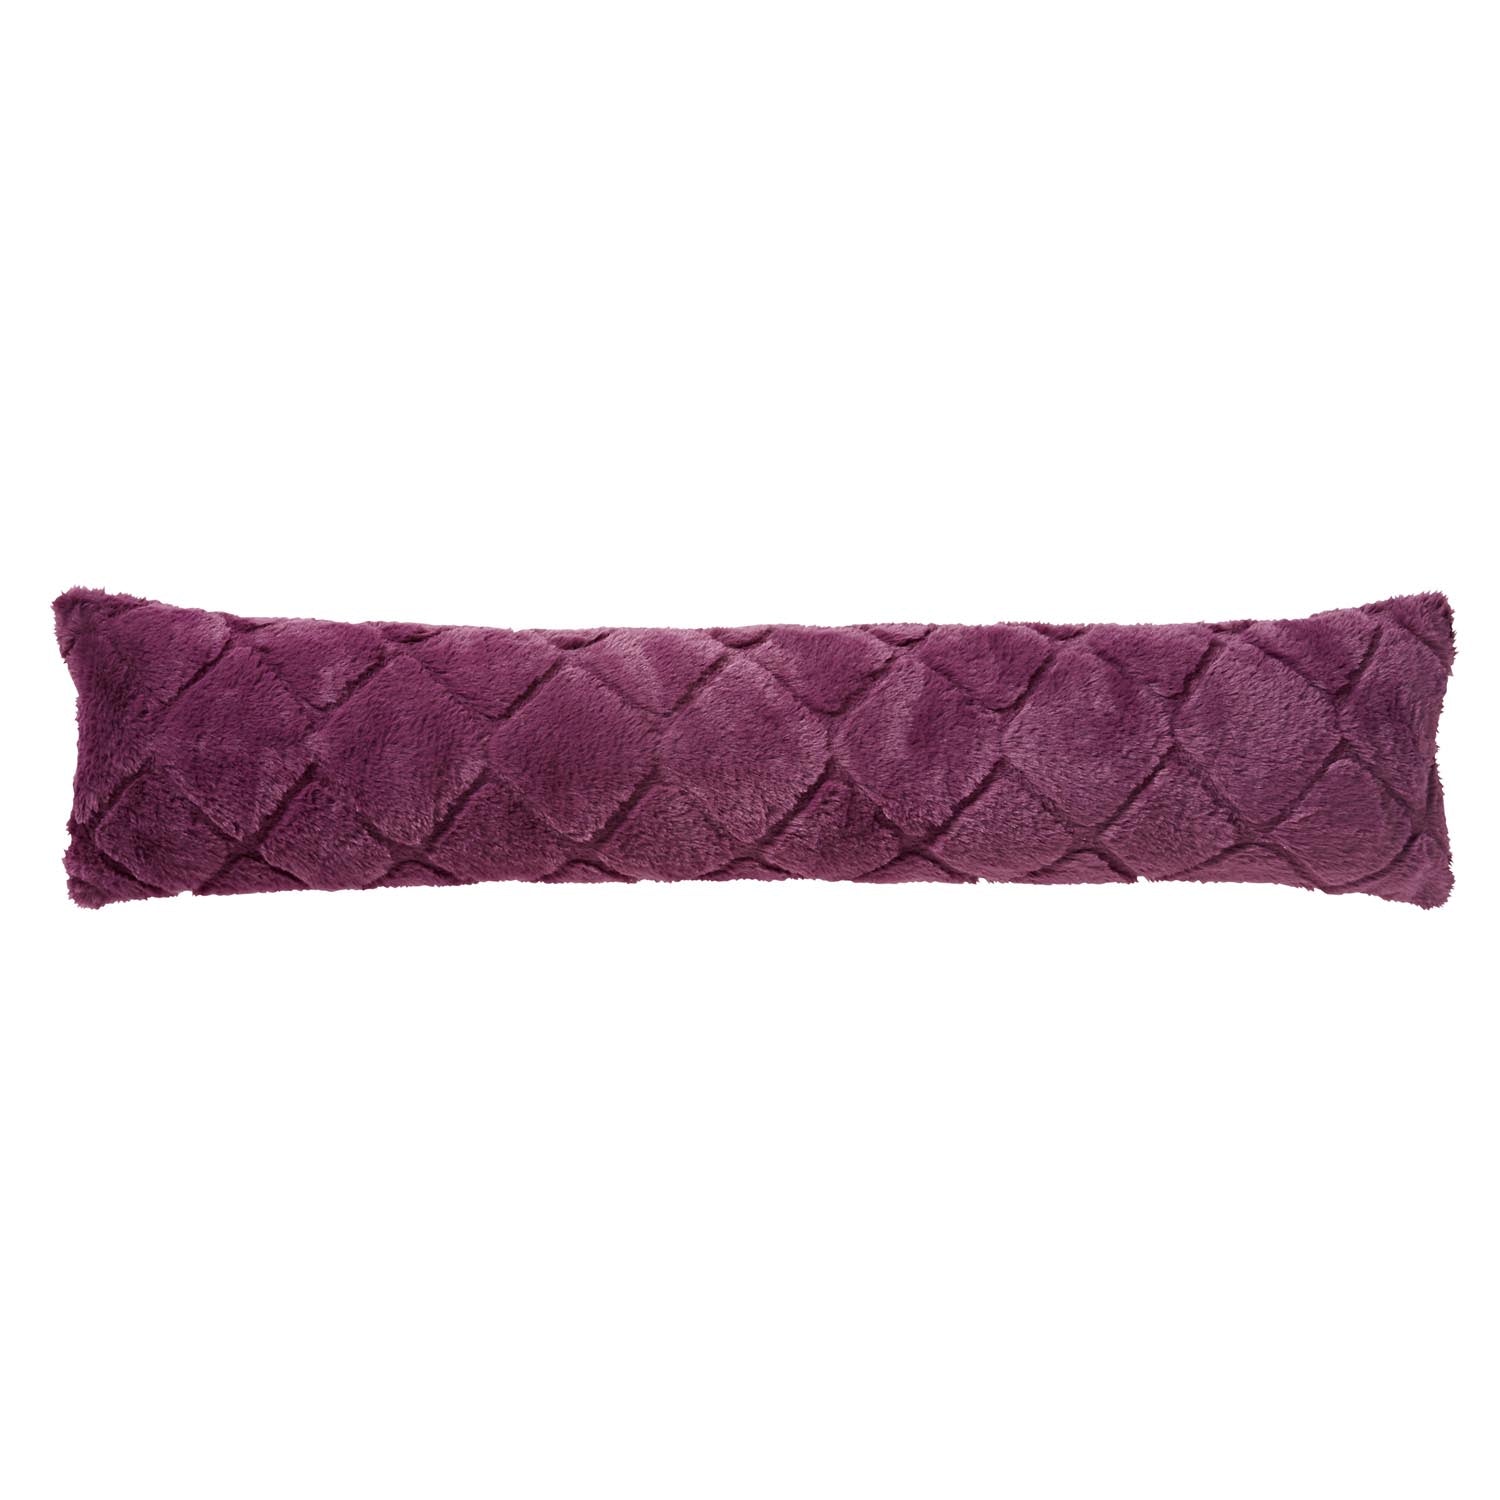 Catherine Lansfield Draught Excluder 90cm x 20cm - Plum 3 Shaws Department Stores